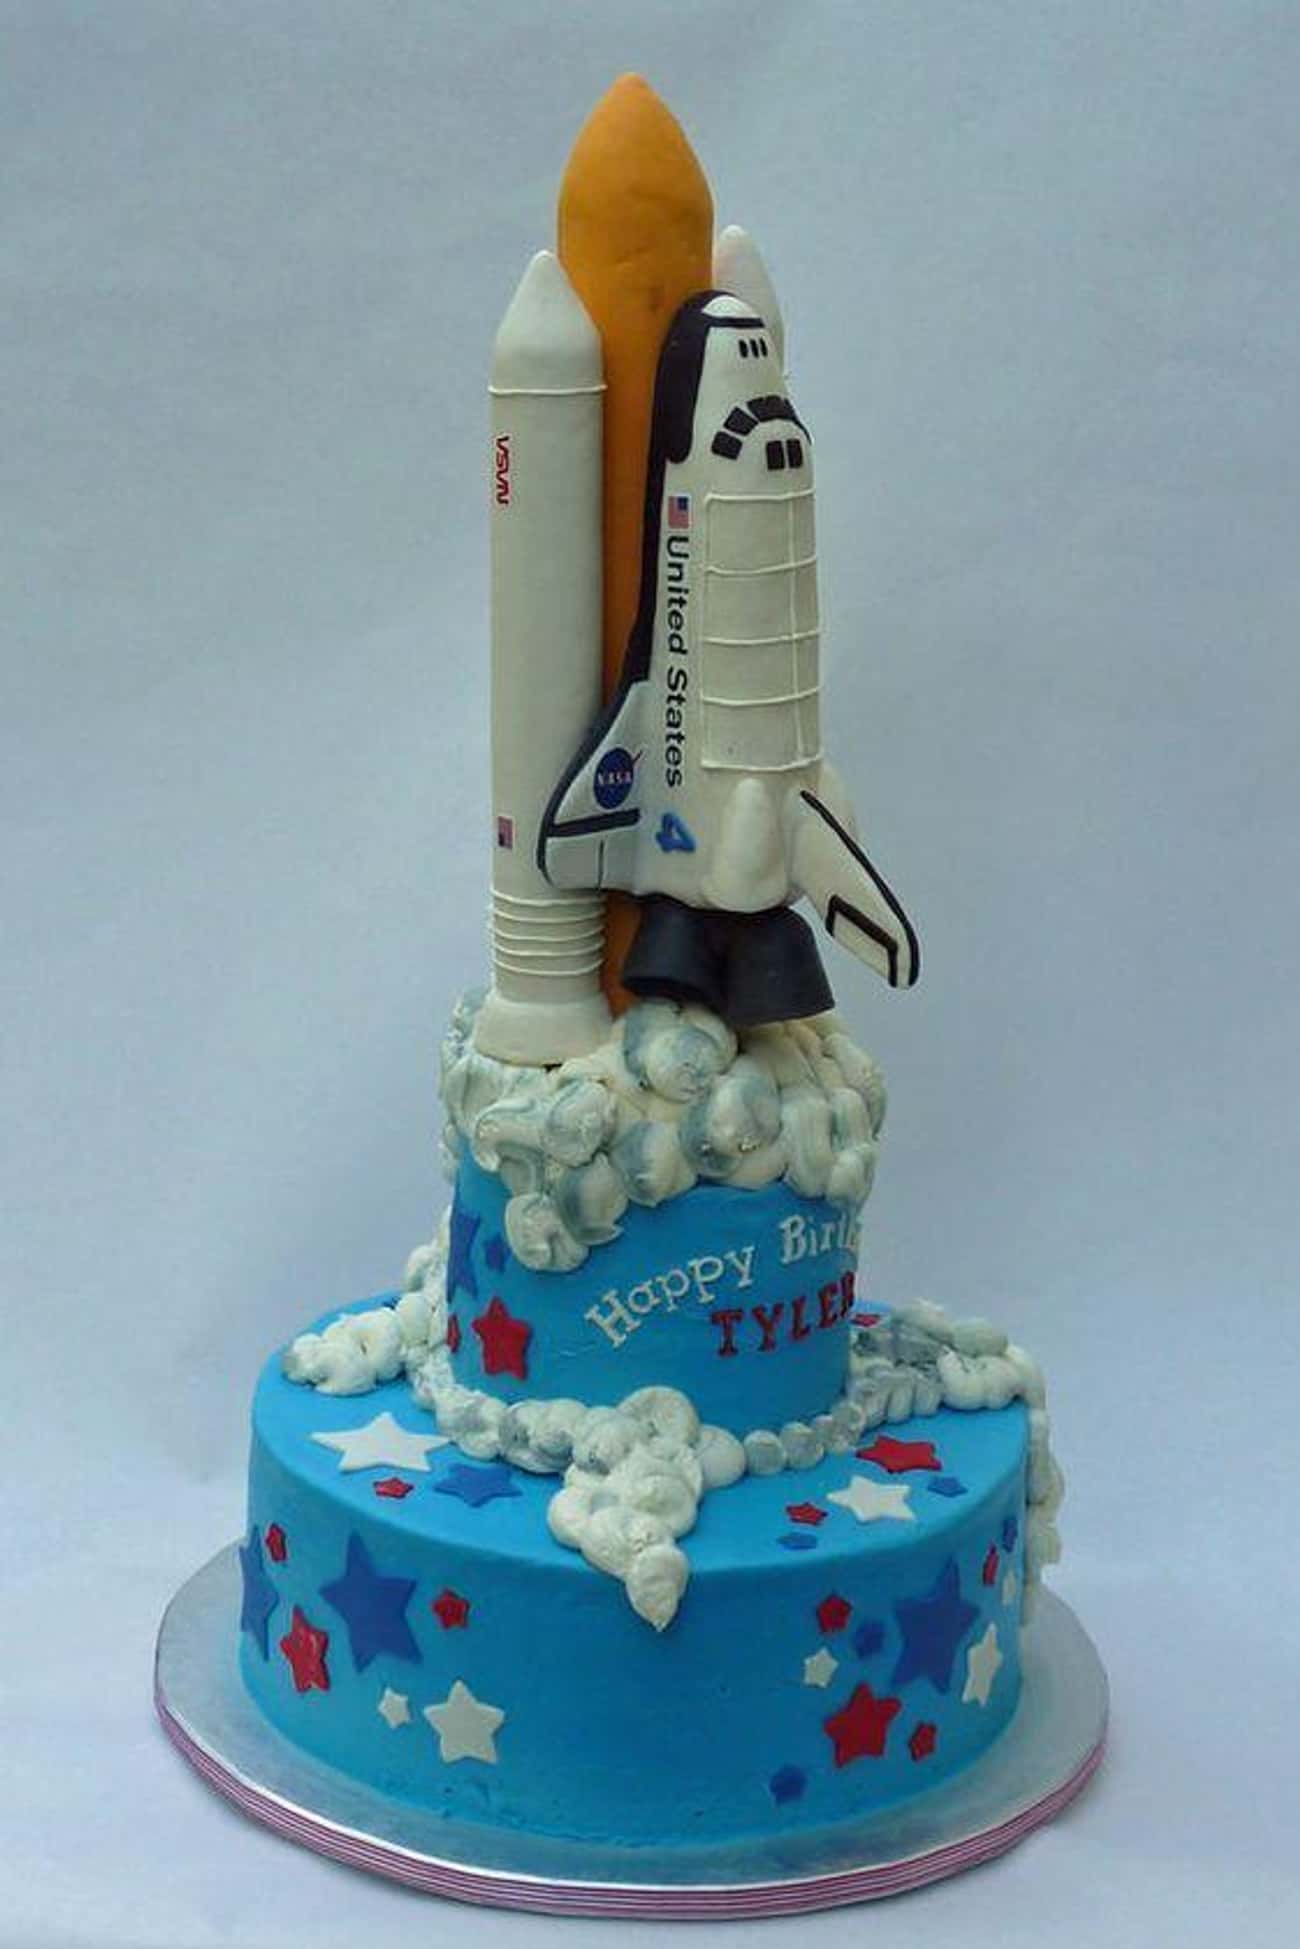 Houston, We Have a Cake